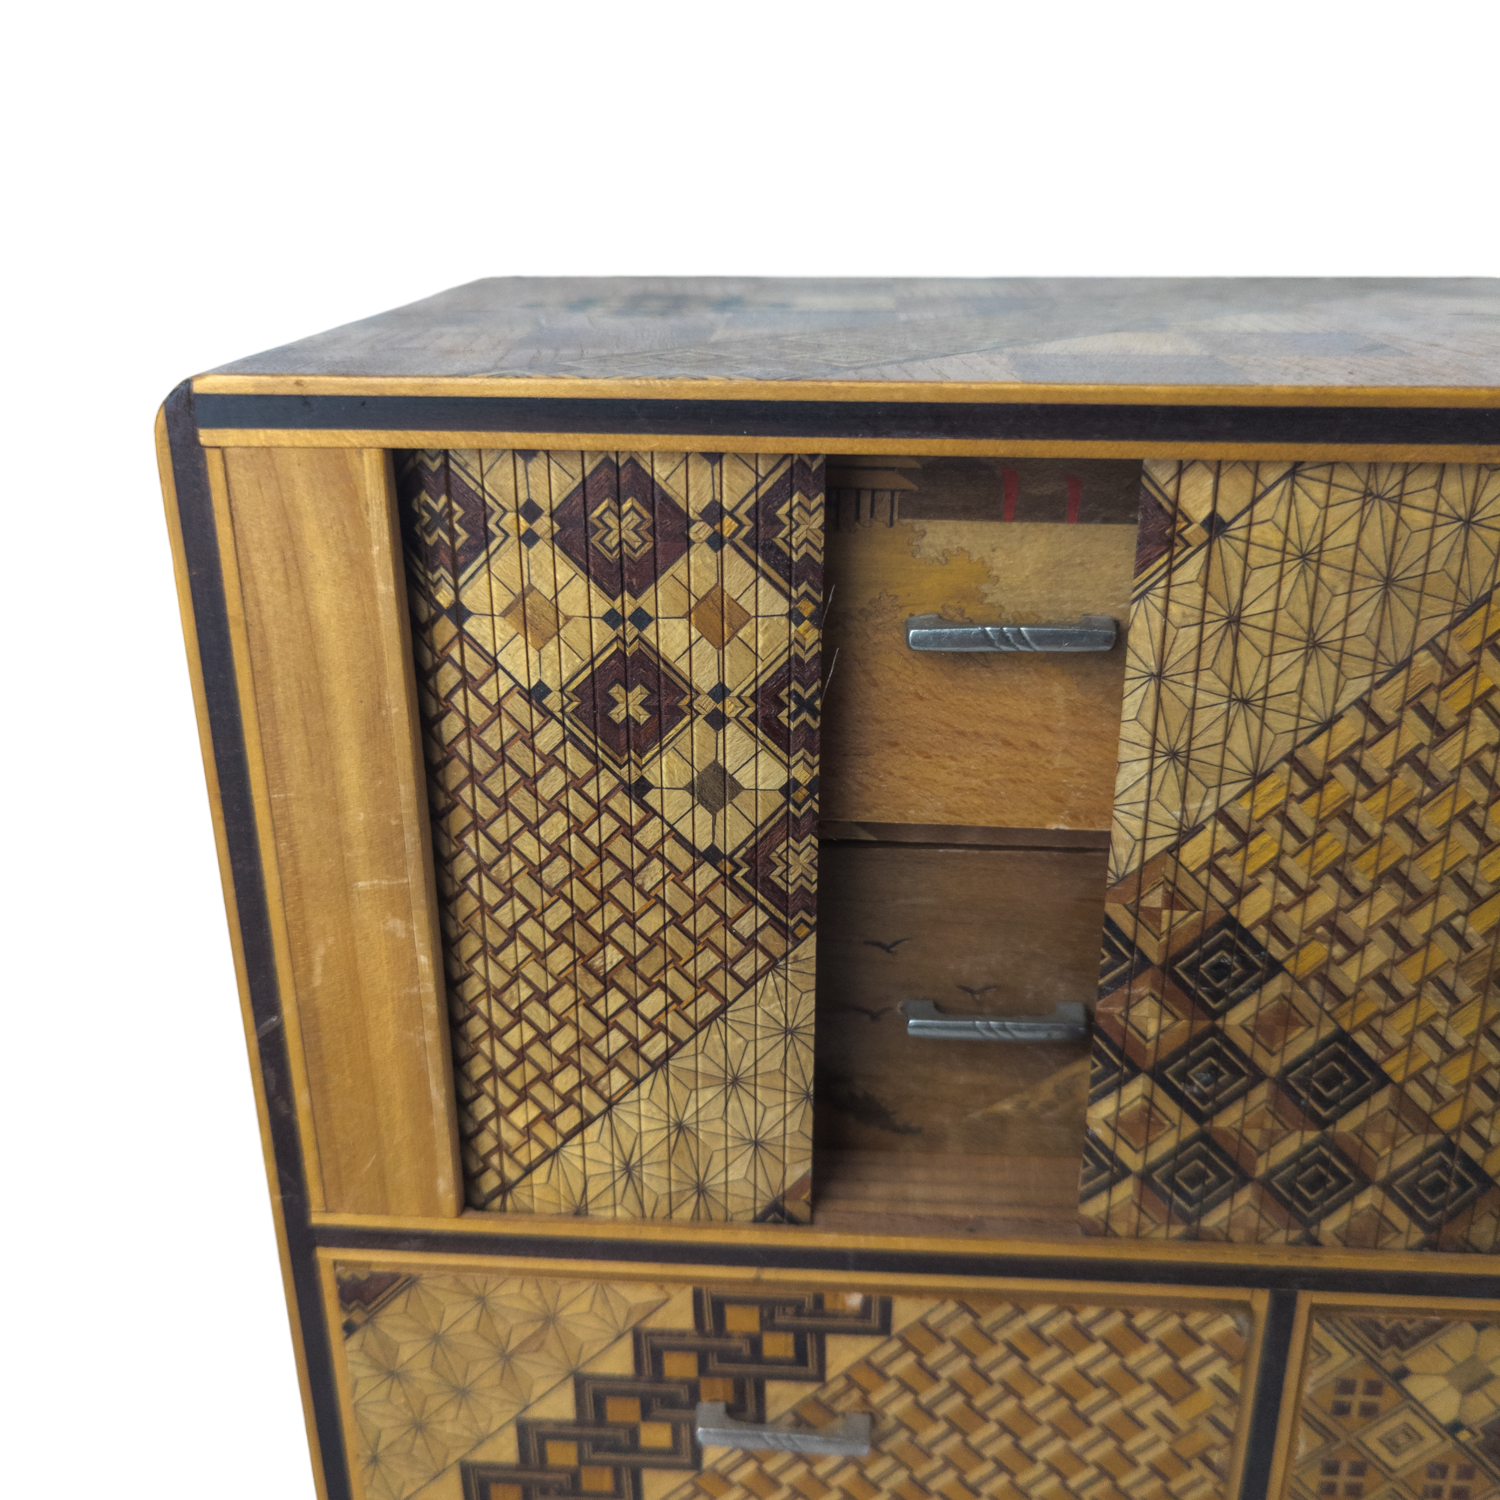 Vintage Japanese Marquetry Inlay Wood Jewelry Chest